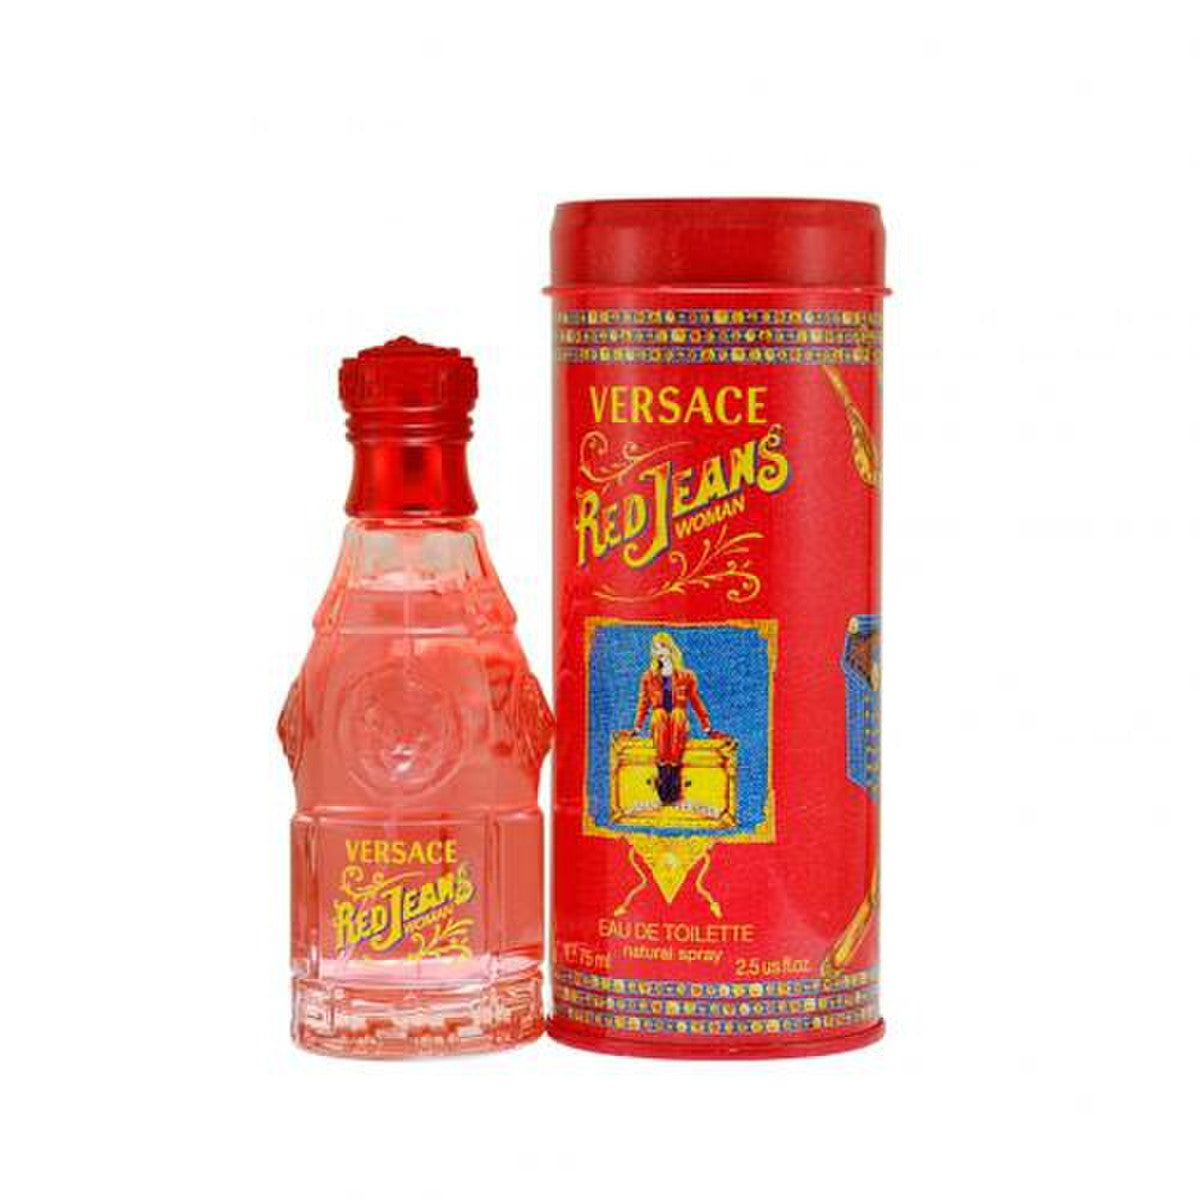 Versace red jeans perfume for women